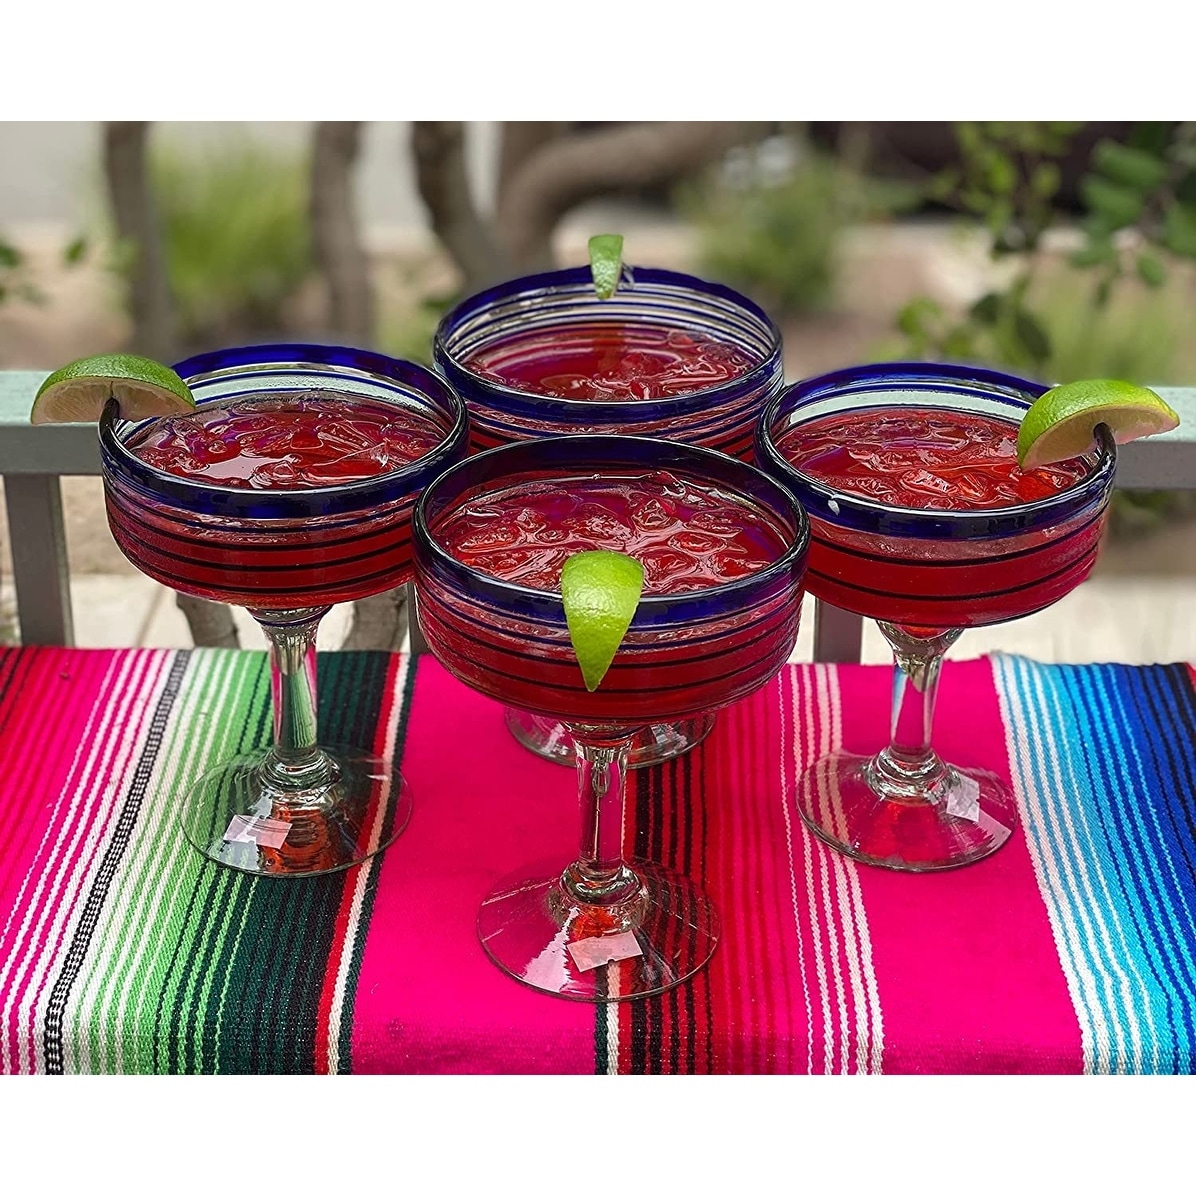 https://ak1.ostkcdn.com/images/products/is/images/direct/0d92ac6e1bb0ad33e2e796db383fdd09cfb473e7/Dos-Sue%C3%B1os-Mexican-Hand-Blown-Glass---Set-of-4-Hand-Blown-Margarita-Glasses-%2816-oz%29-with-Blue-Spiral-Design.jpg